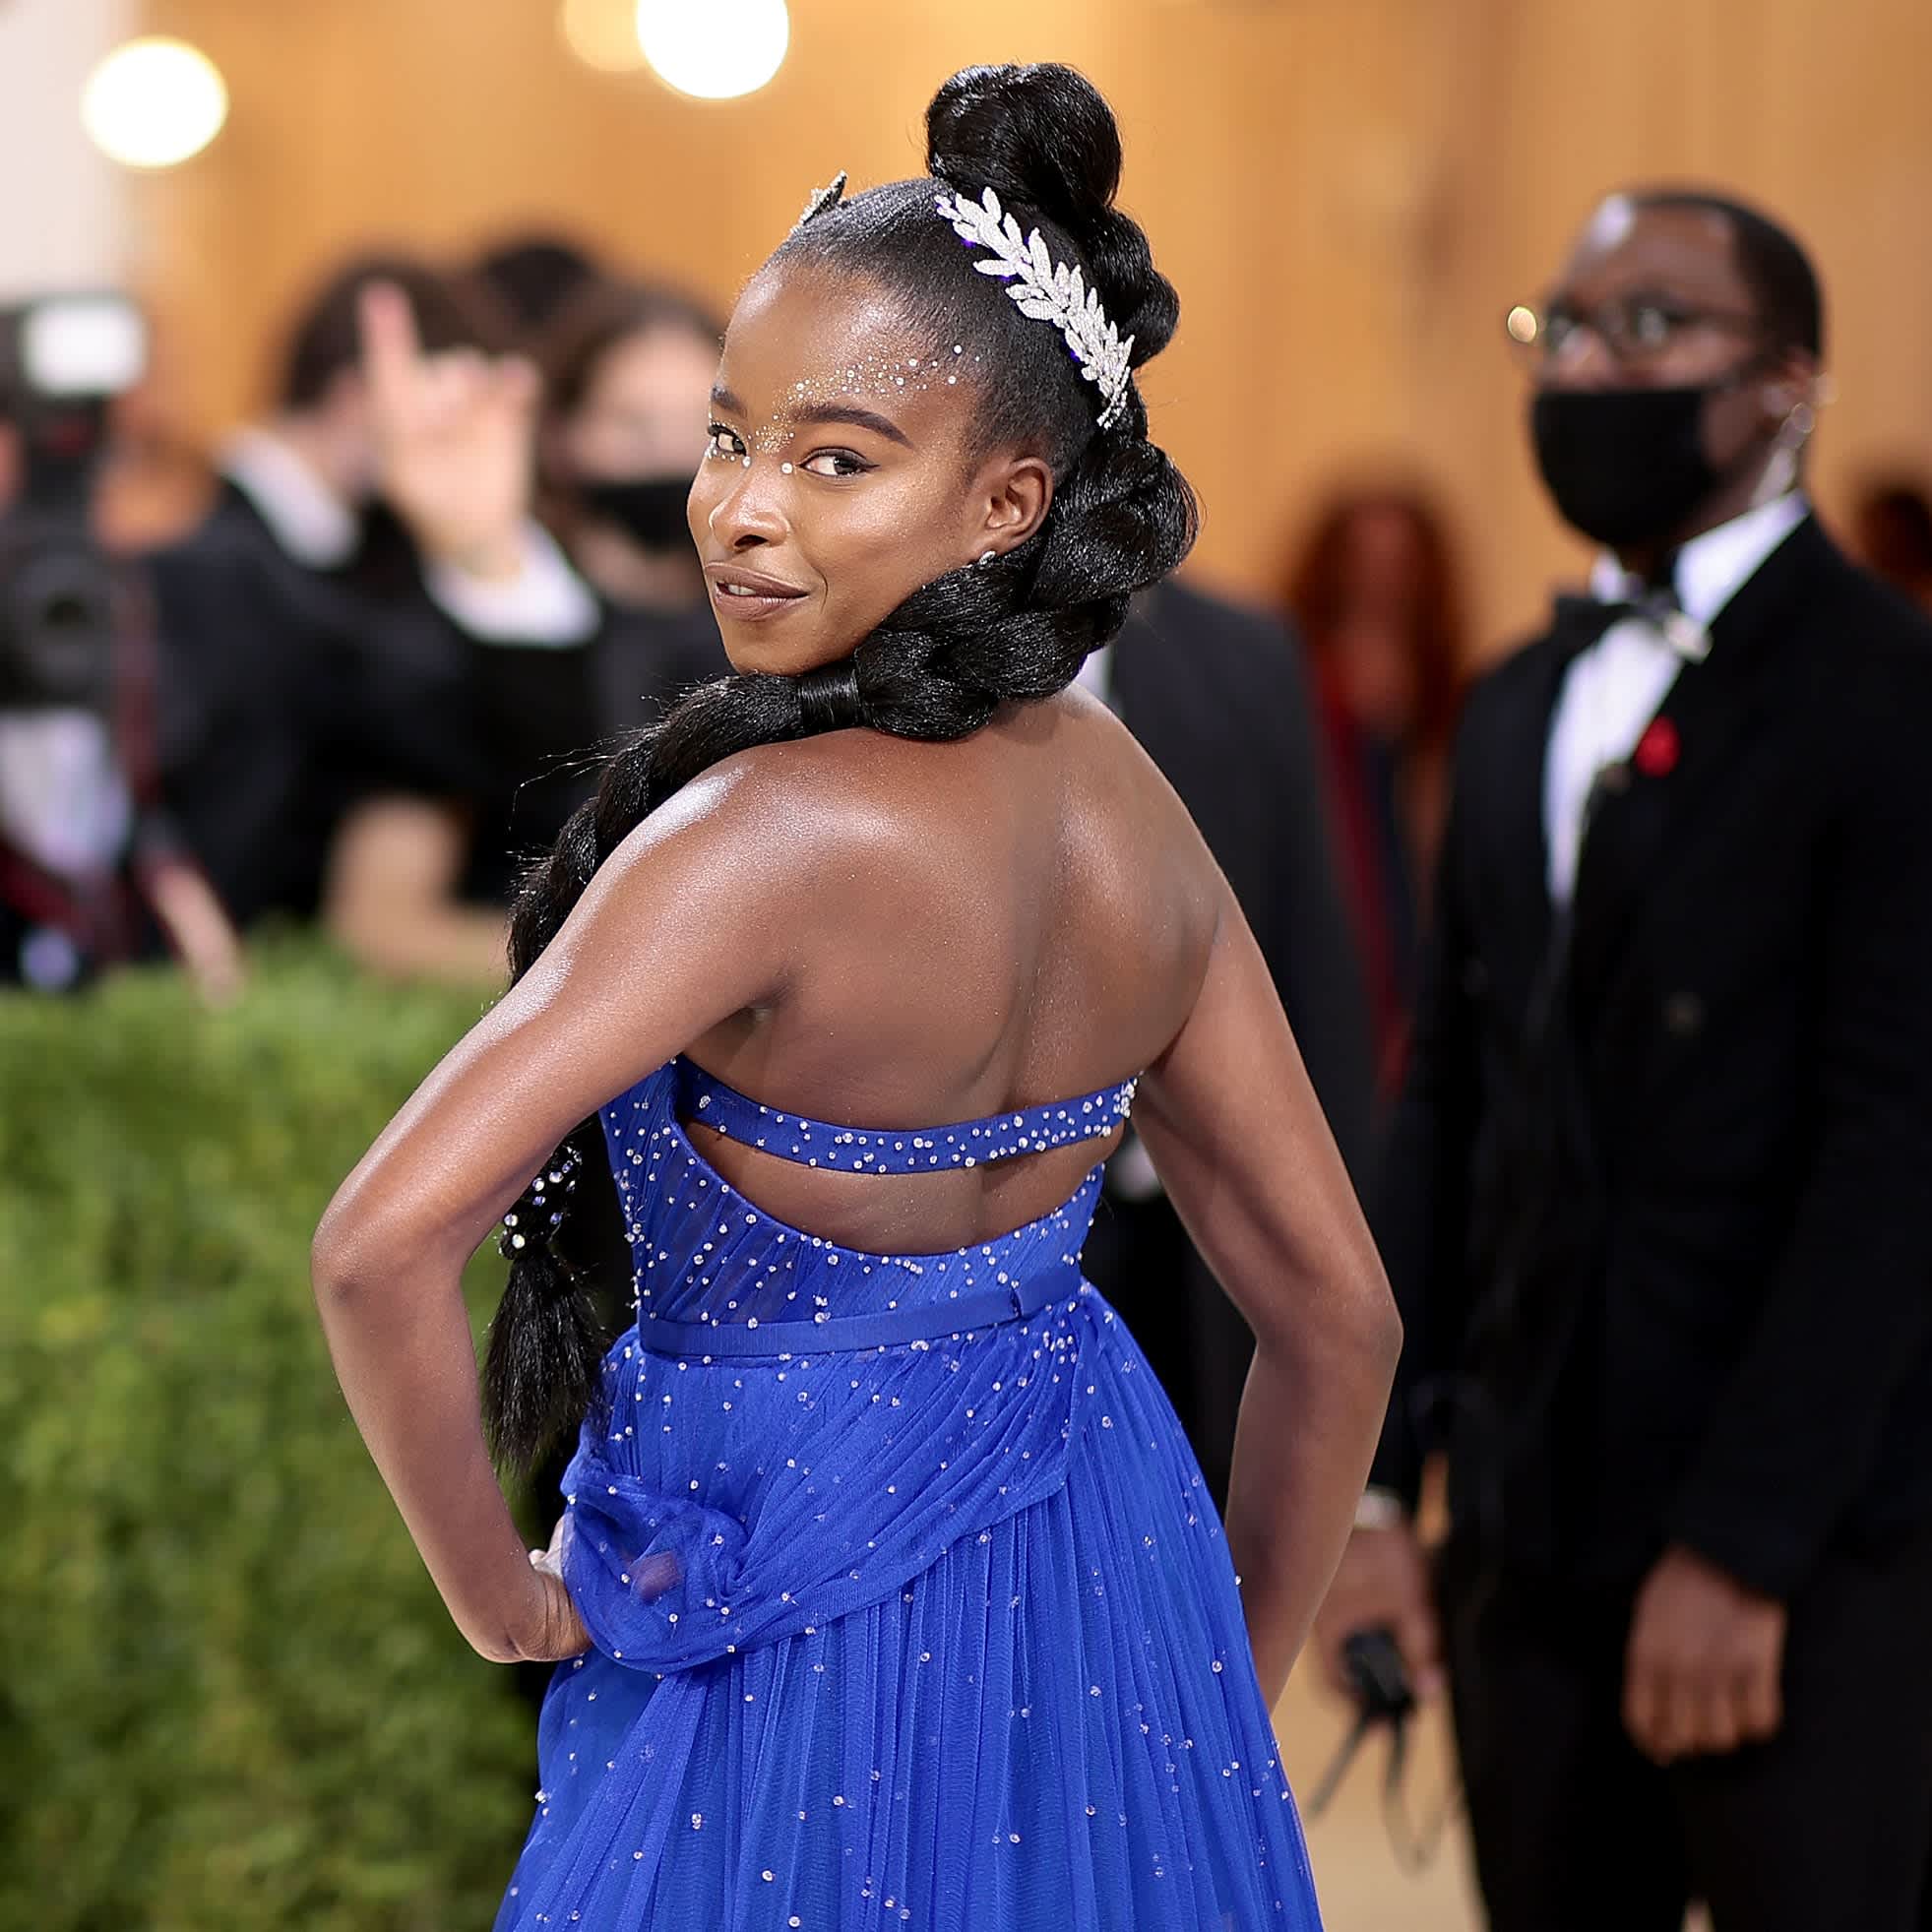 Emma Chamberlain's '60s-Style Lob at the Met Gala Almost Made Us Forget  What Year It Is